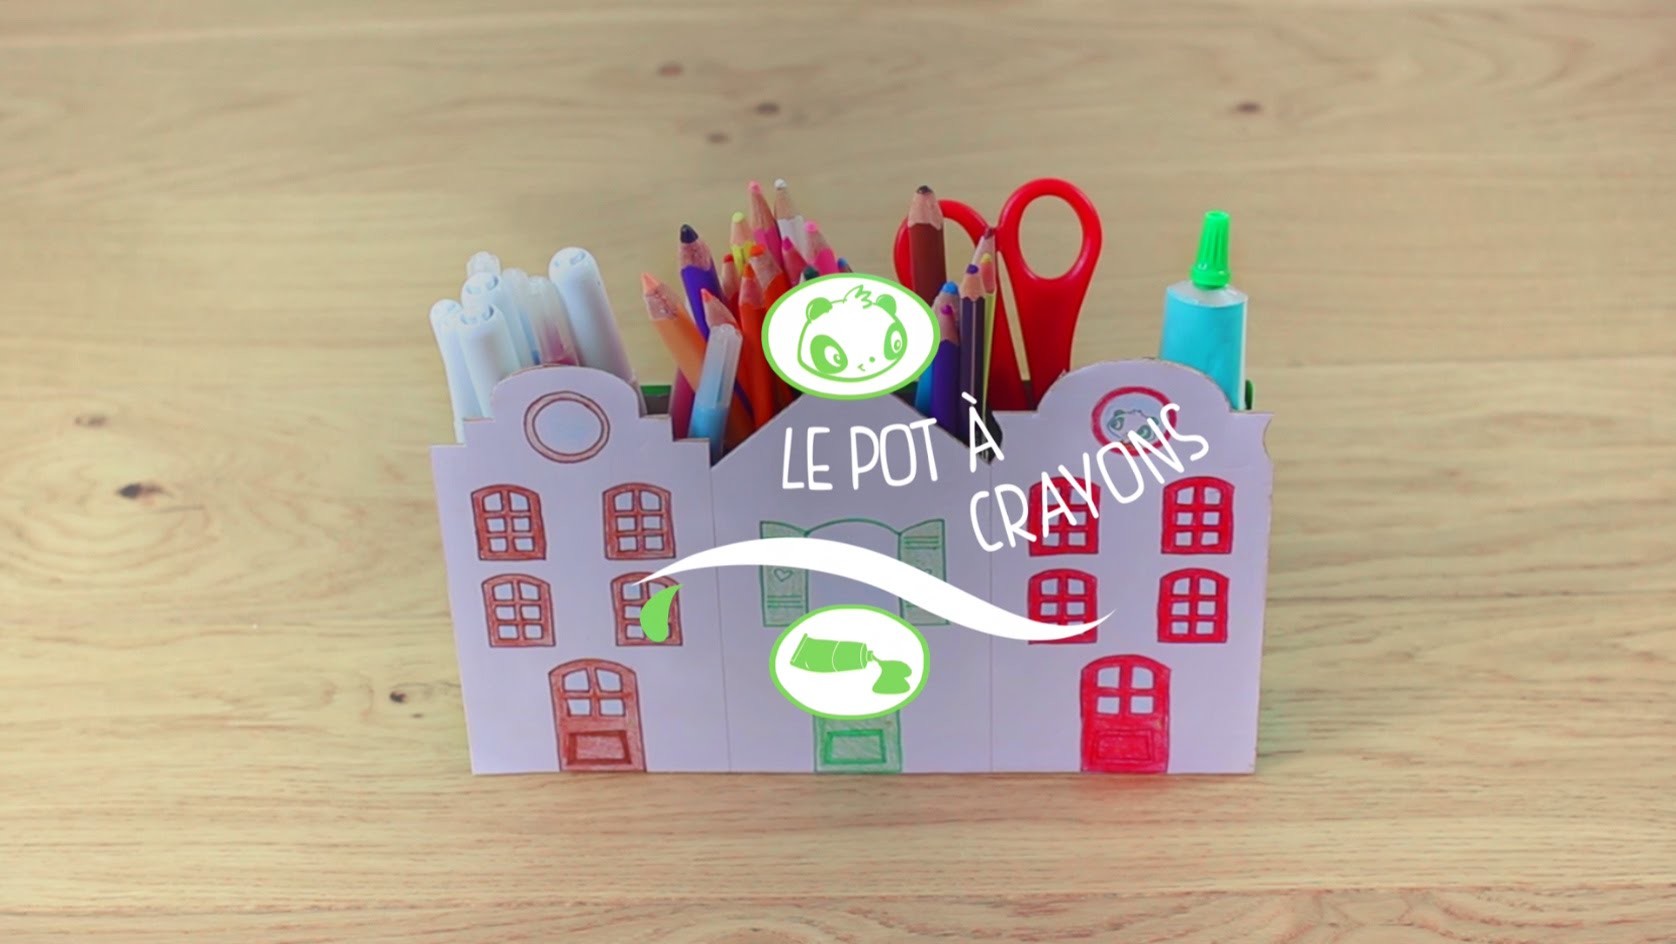 The Daily Craft : Le pot à crayons